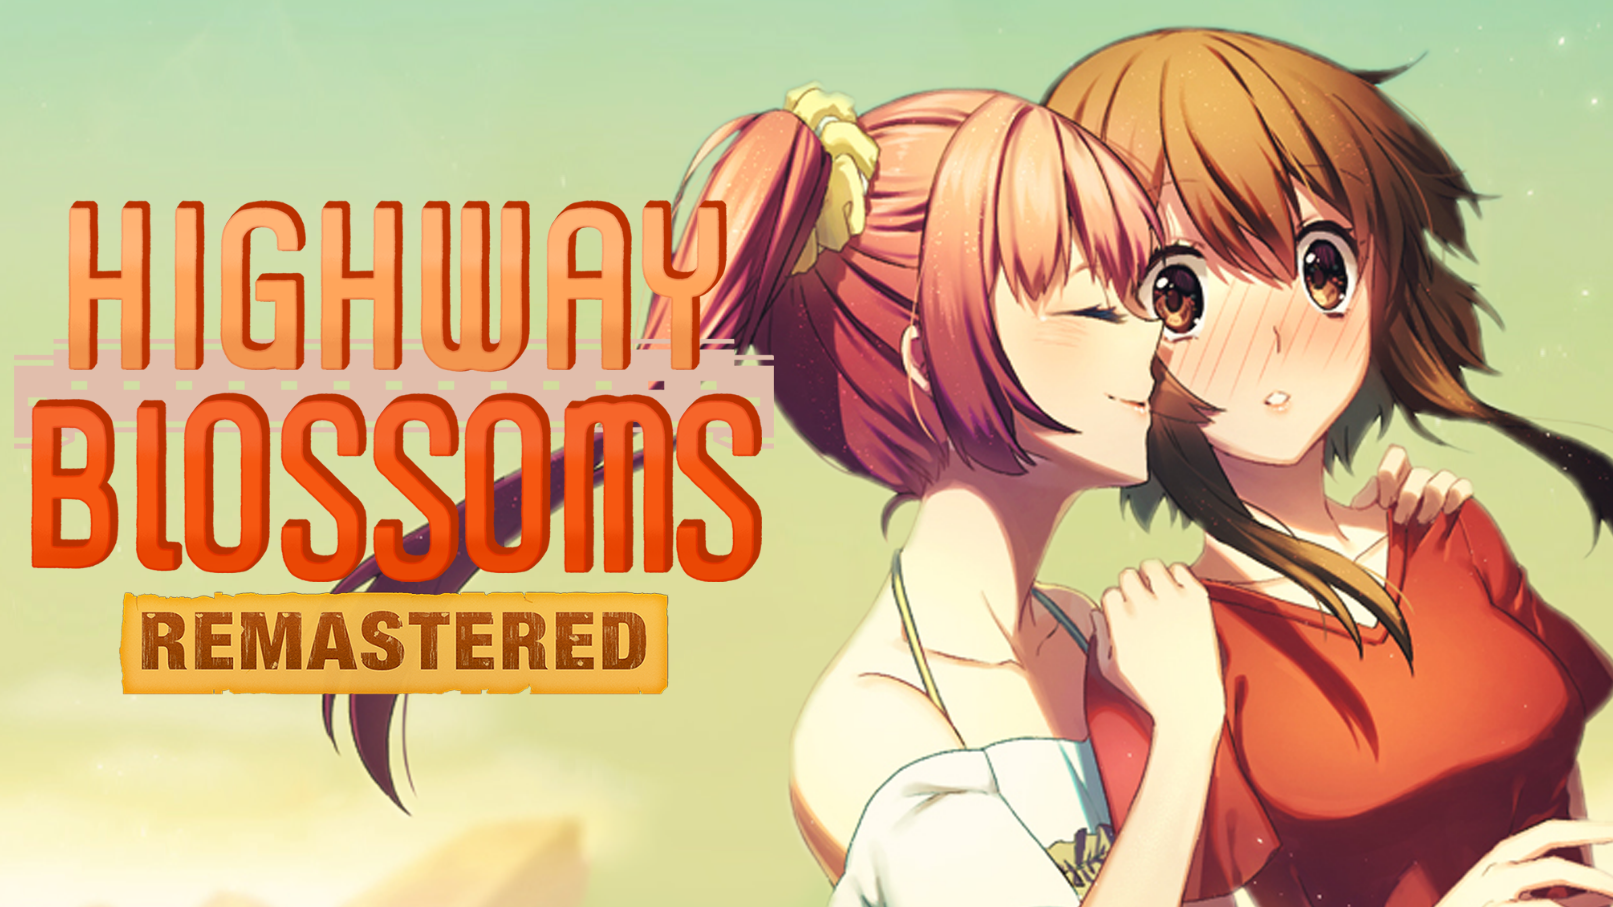 Highway Blossoms: Remastered